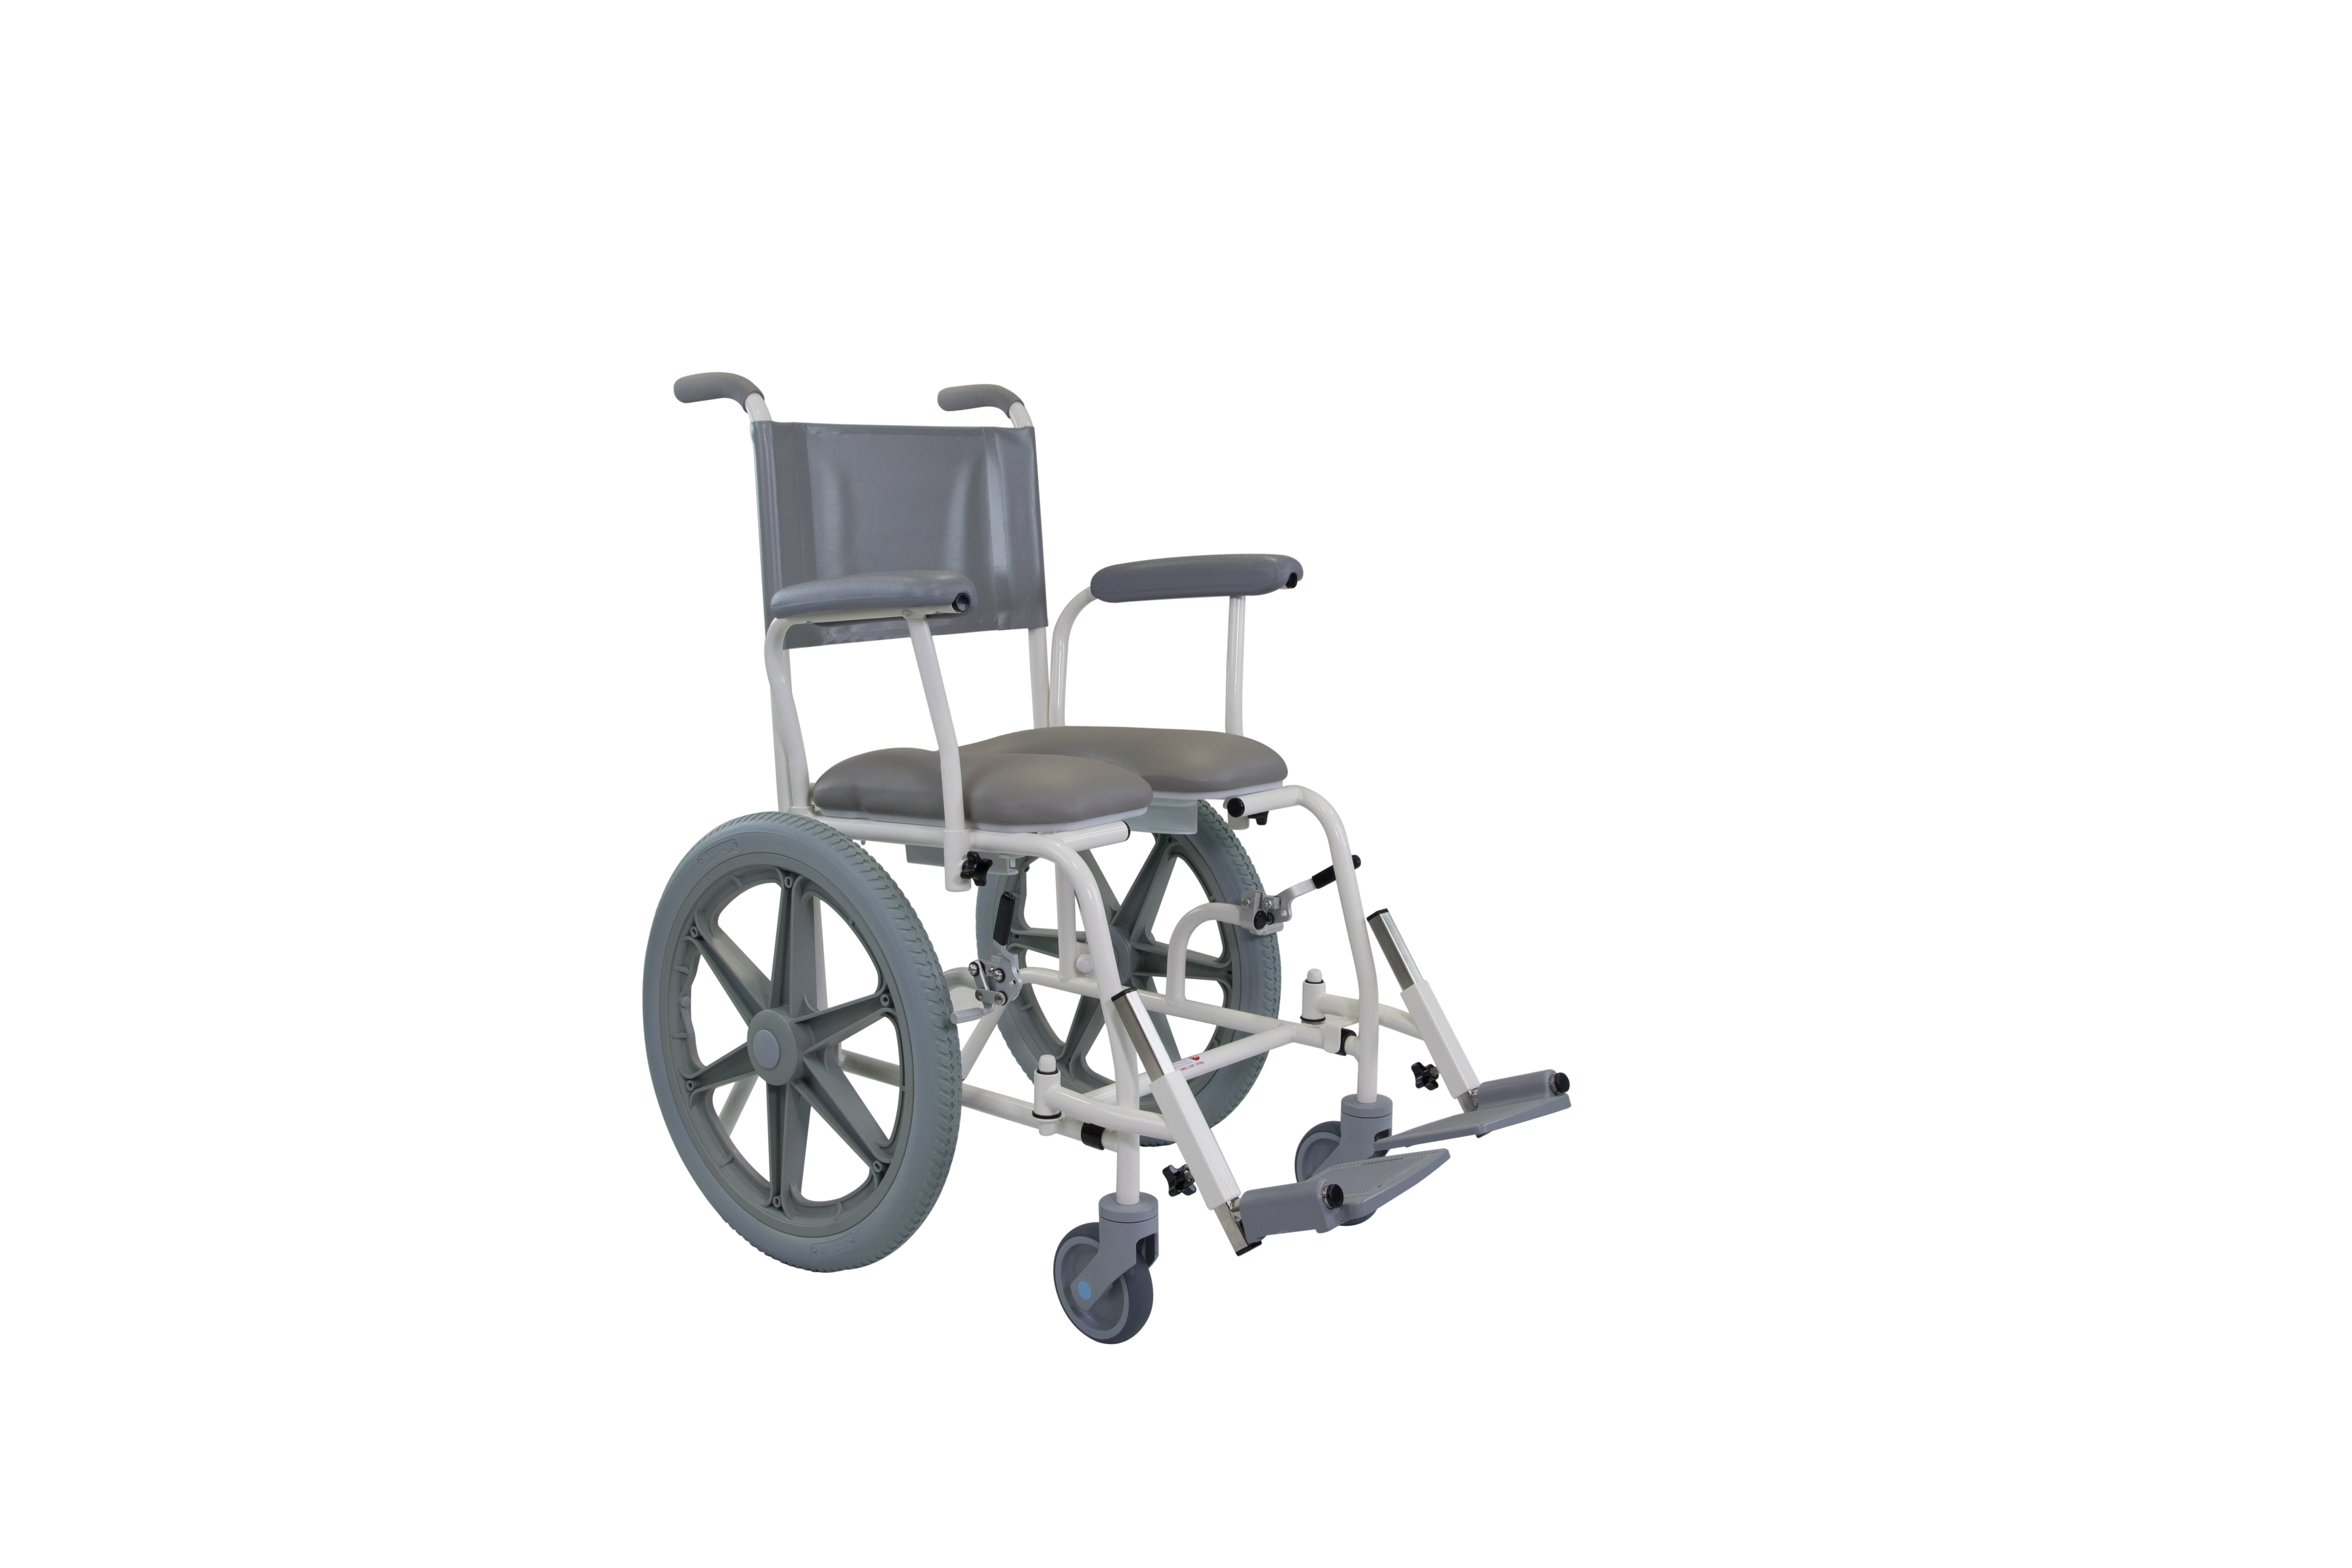 Freeway T60 self-propelled shower, toilet or commode chair